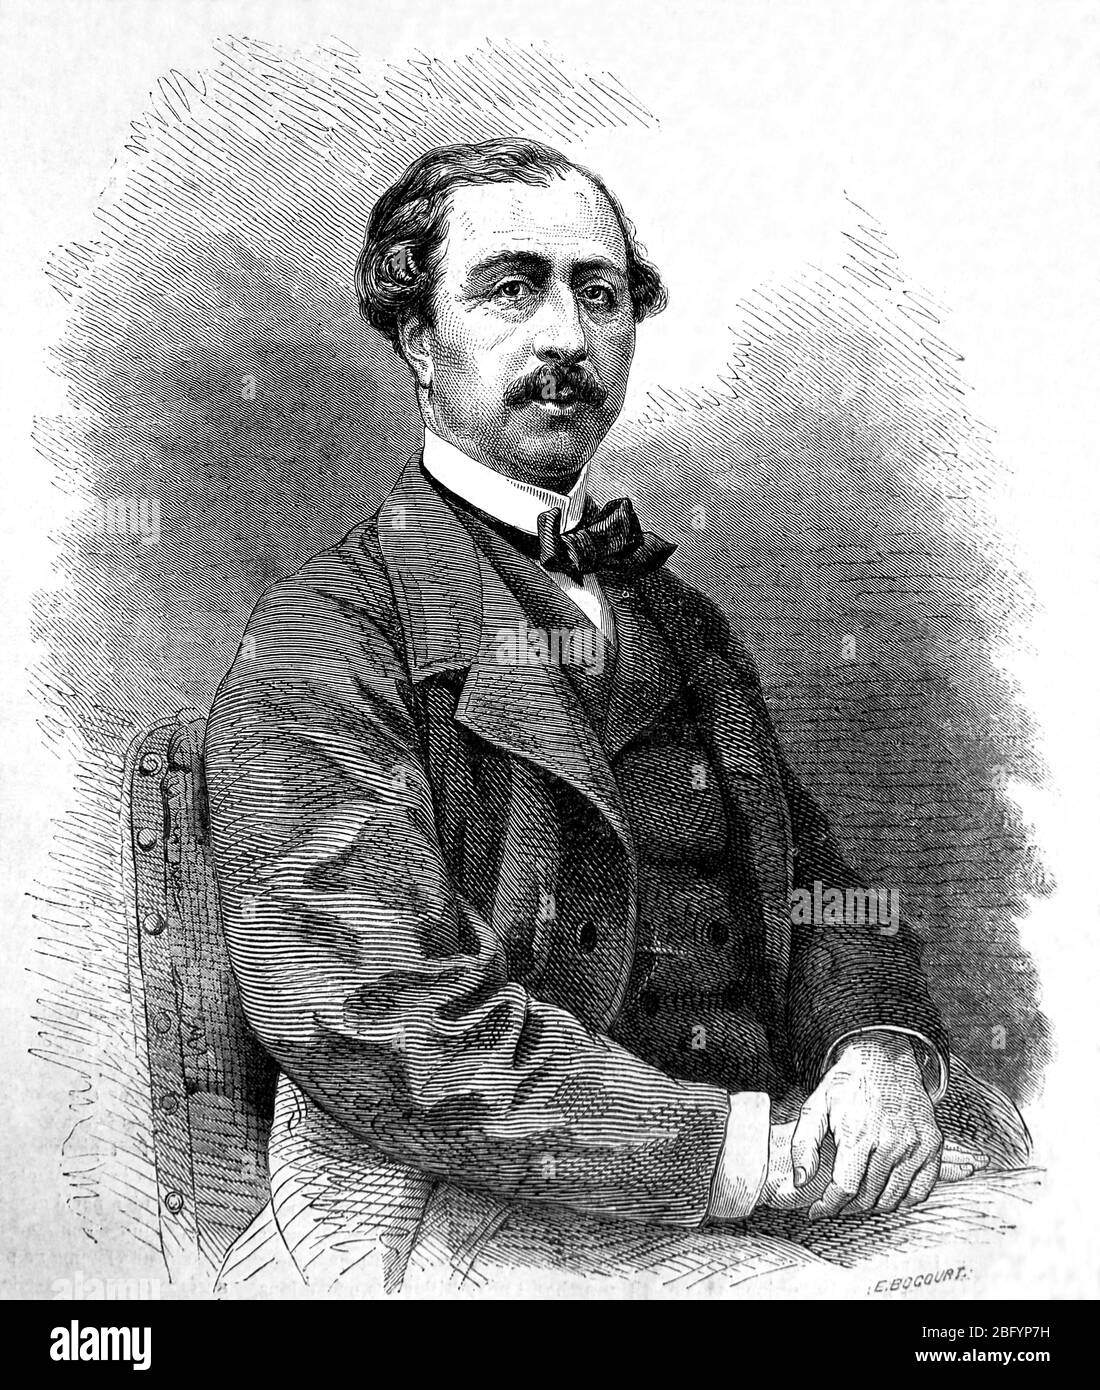 Lucien Anatole Prevost (1829-1870) French journalist, essayist and diplomat. Portrait, engraving by   E. Bocourt. Published in 1866. Stock Photo